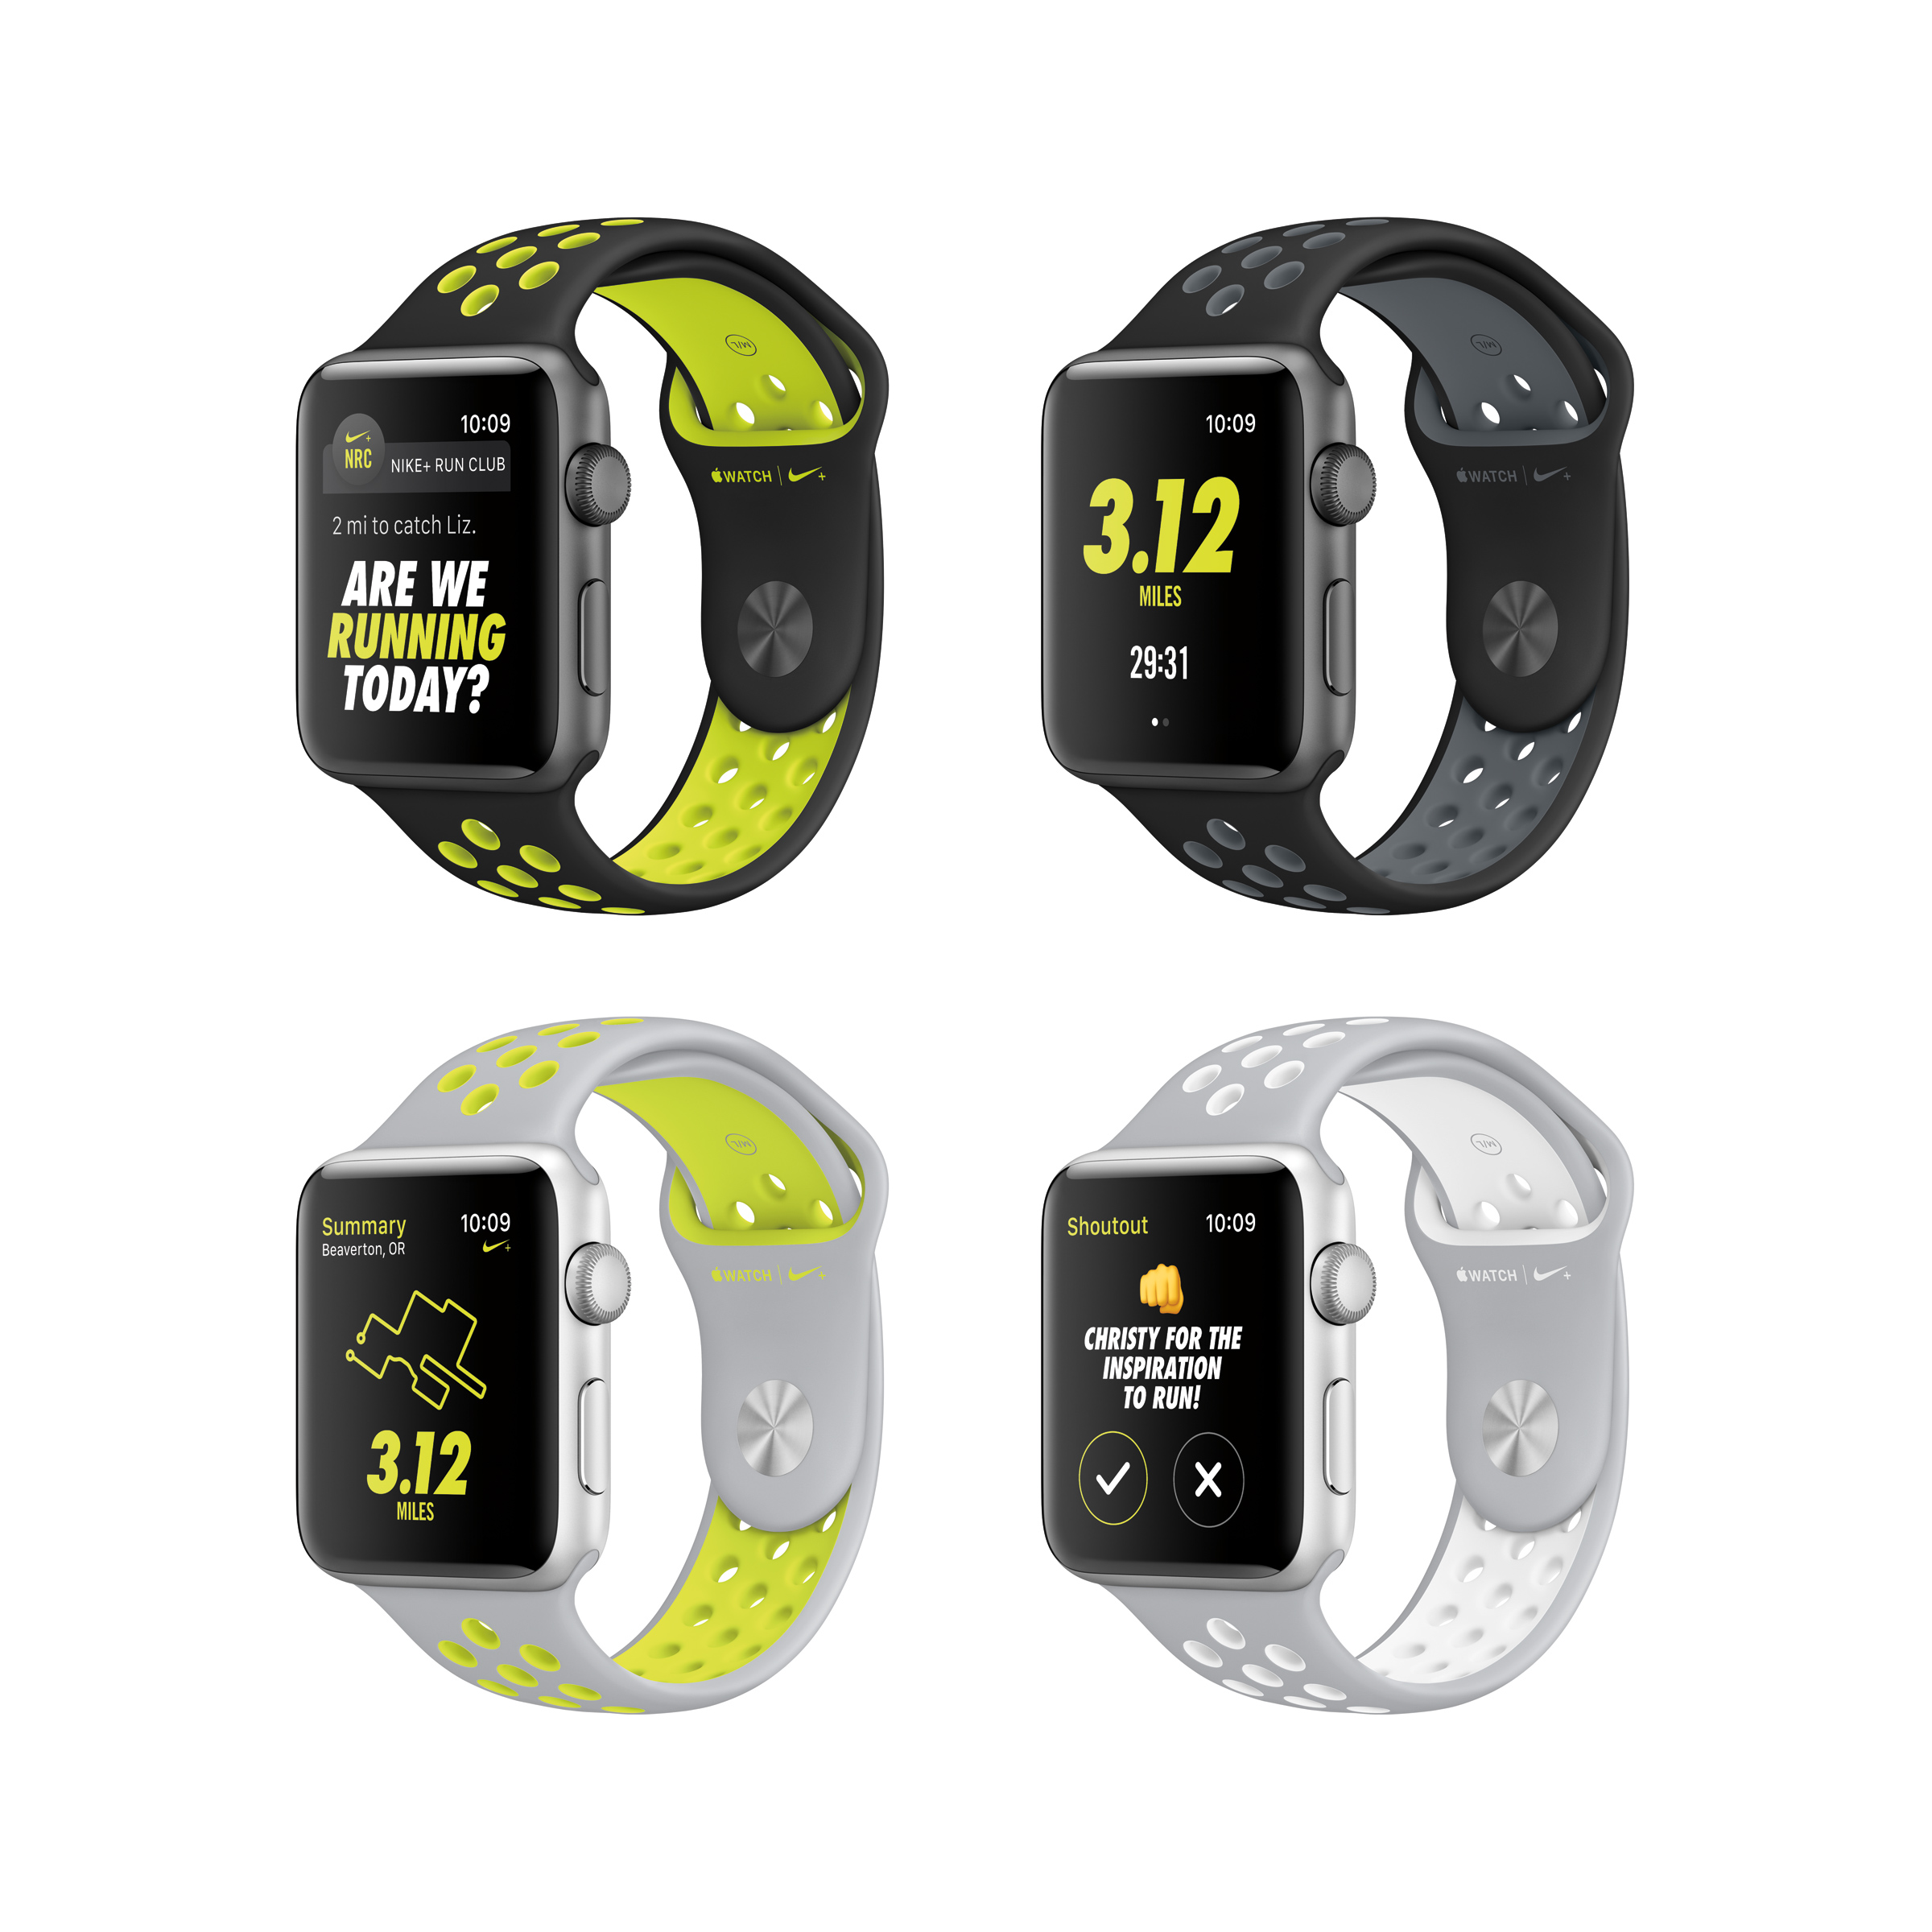 Apple Watch Nike + is released today Friday, October 28. / RoC 